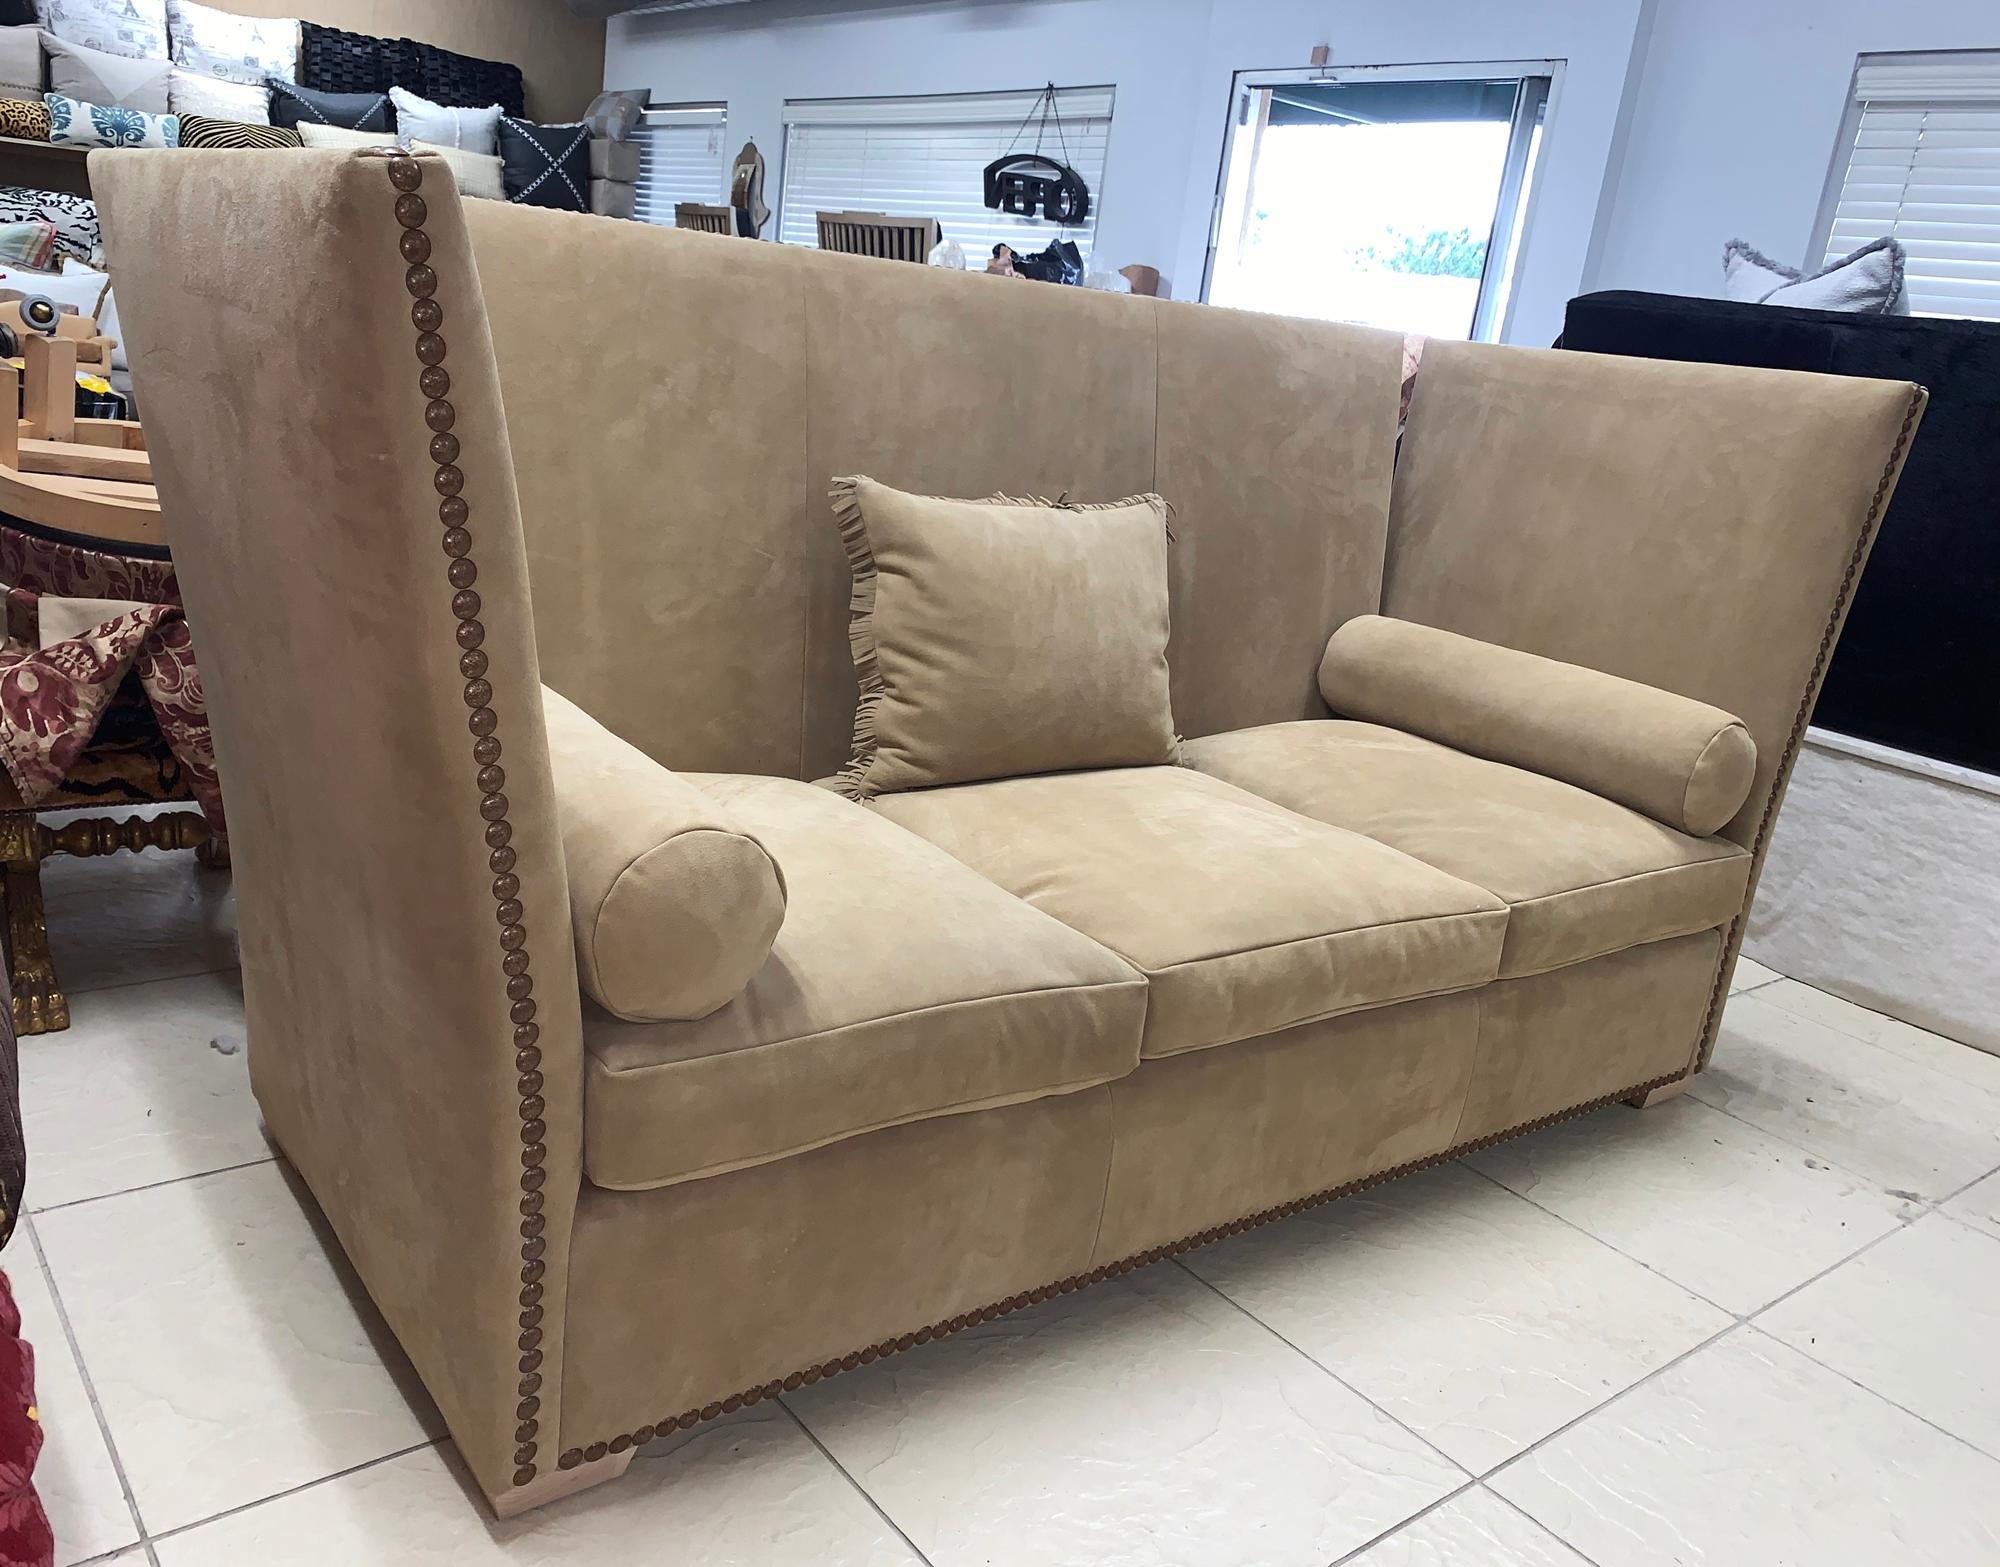 Beautiful 3-seat sofa in the Knole style, upholstered in brown suede with brass nail-head trimming, newly upholstered, the cushions are down-filled all new material, the sofa is in excellent condition and ready to be displayed.
Measurements:
8ft